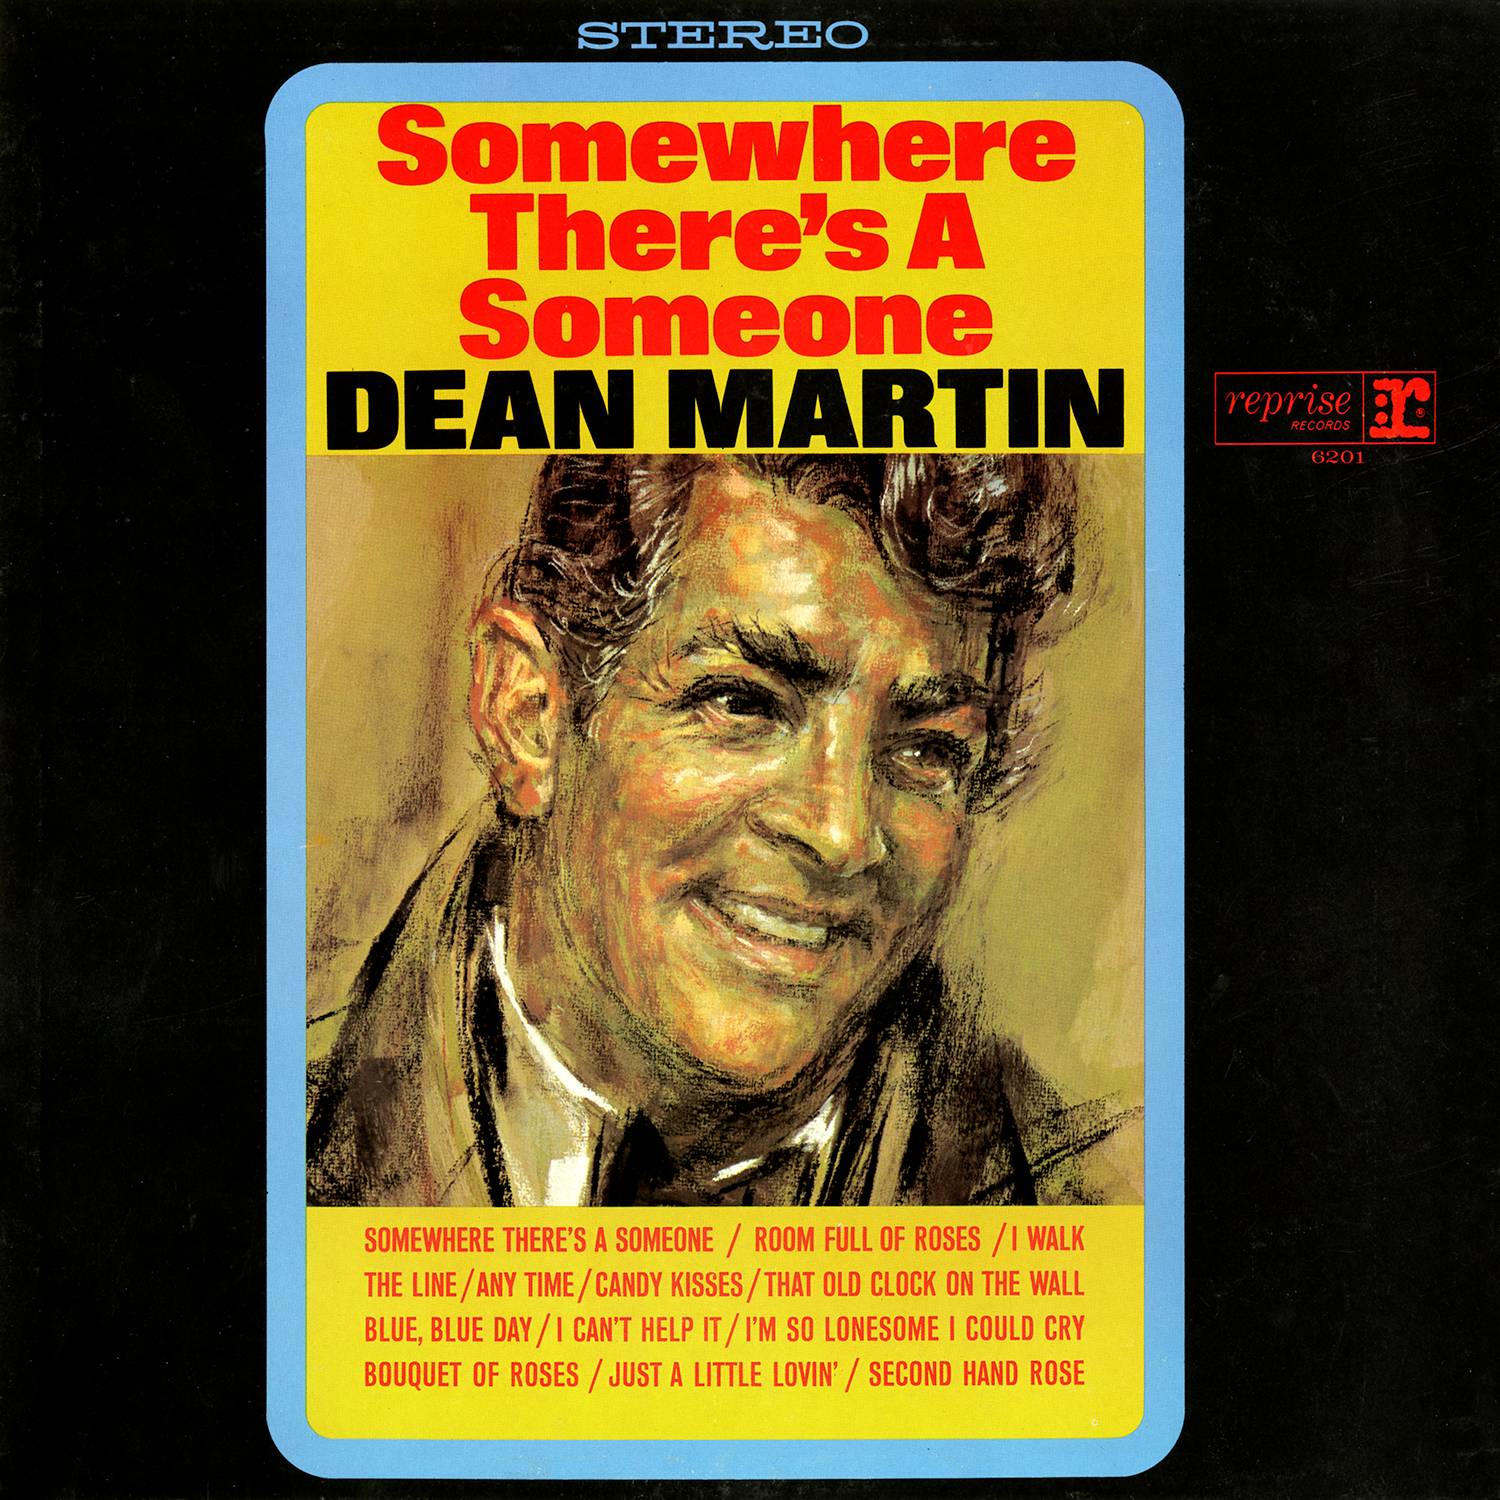 Dean Martin - Somewhere There’s A Someone (1966/2016) [AcousticSounds FLAC 24bit/96kHz]